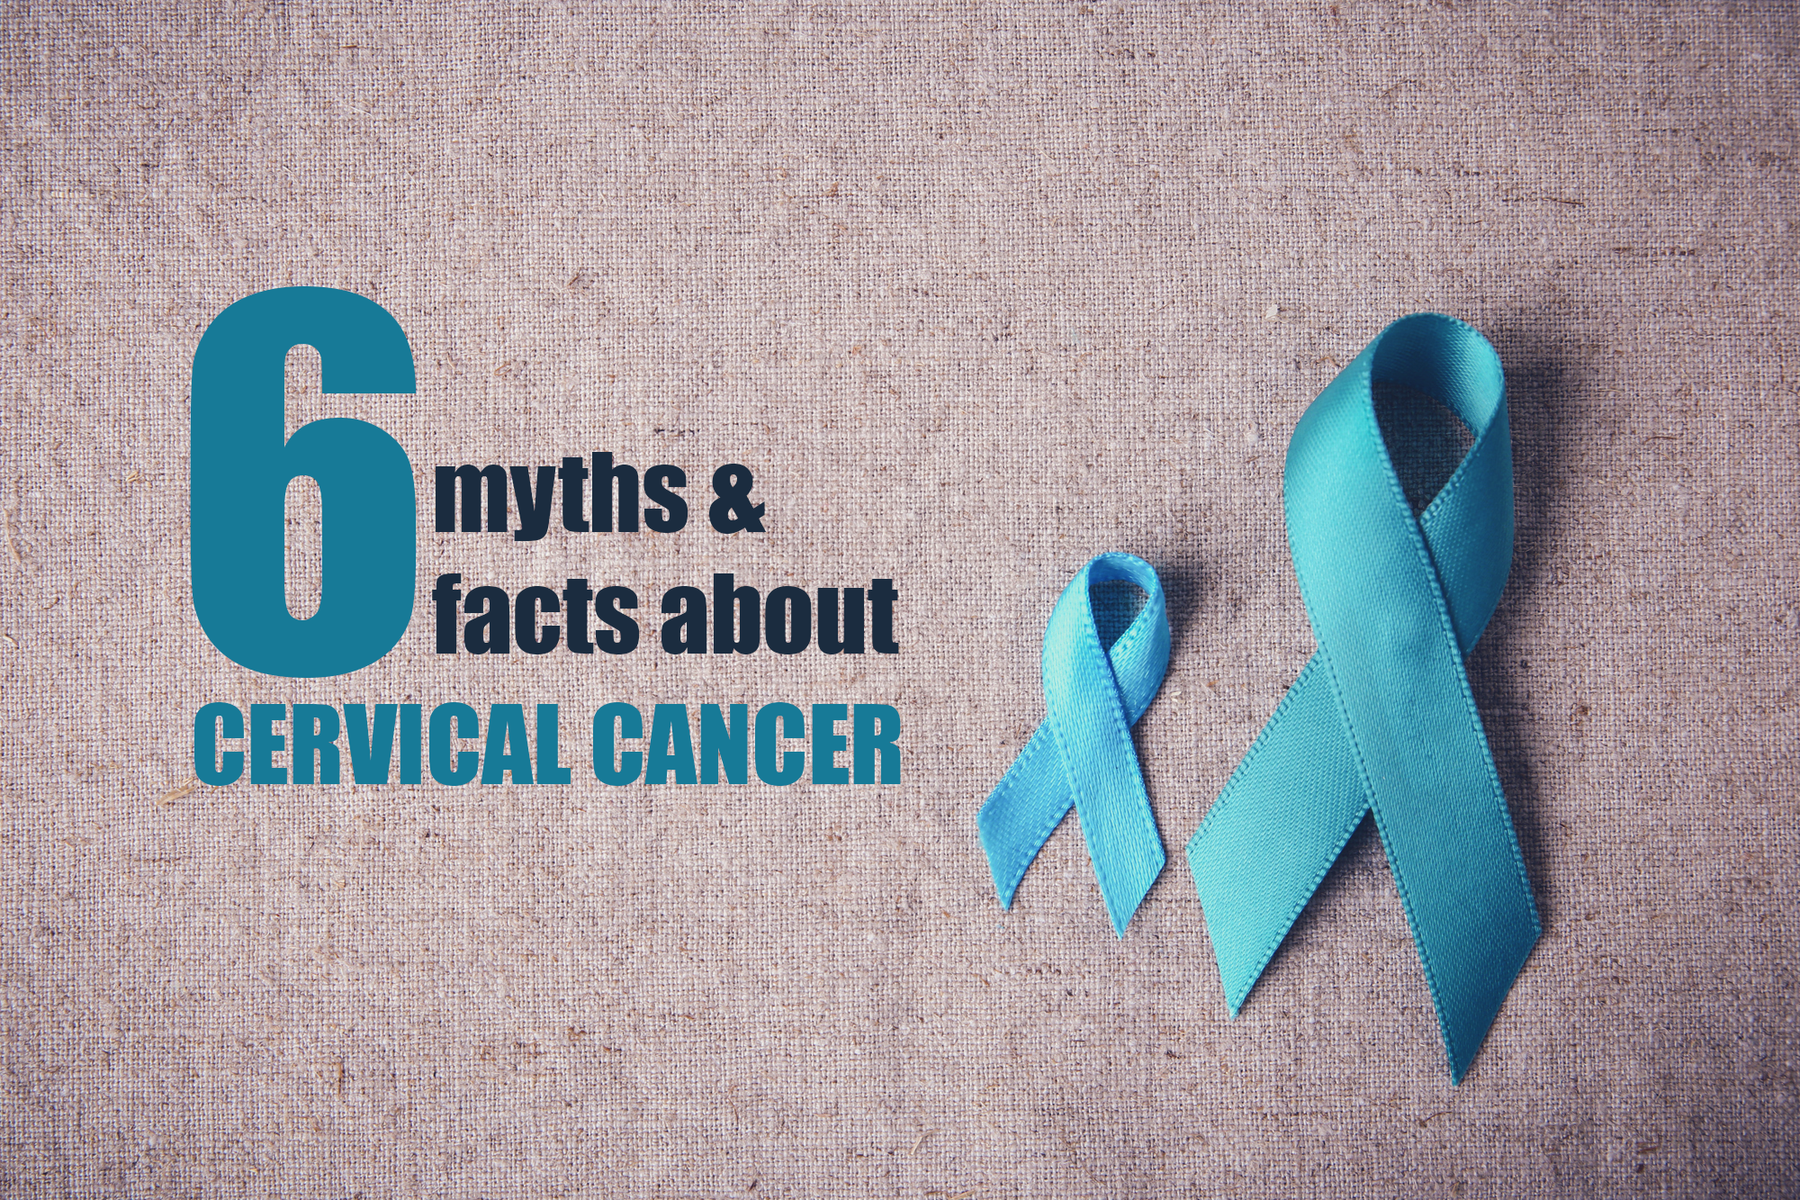 6 myths and facts about Cervical Cancer